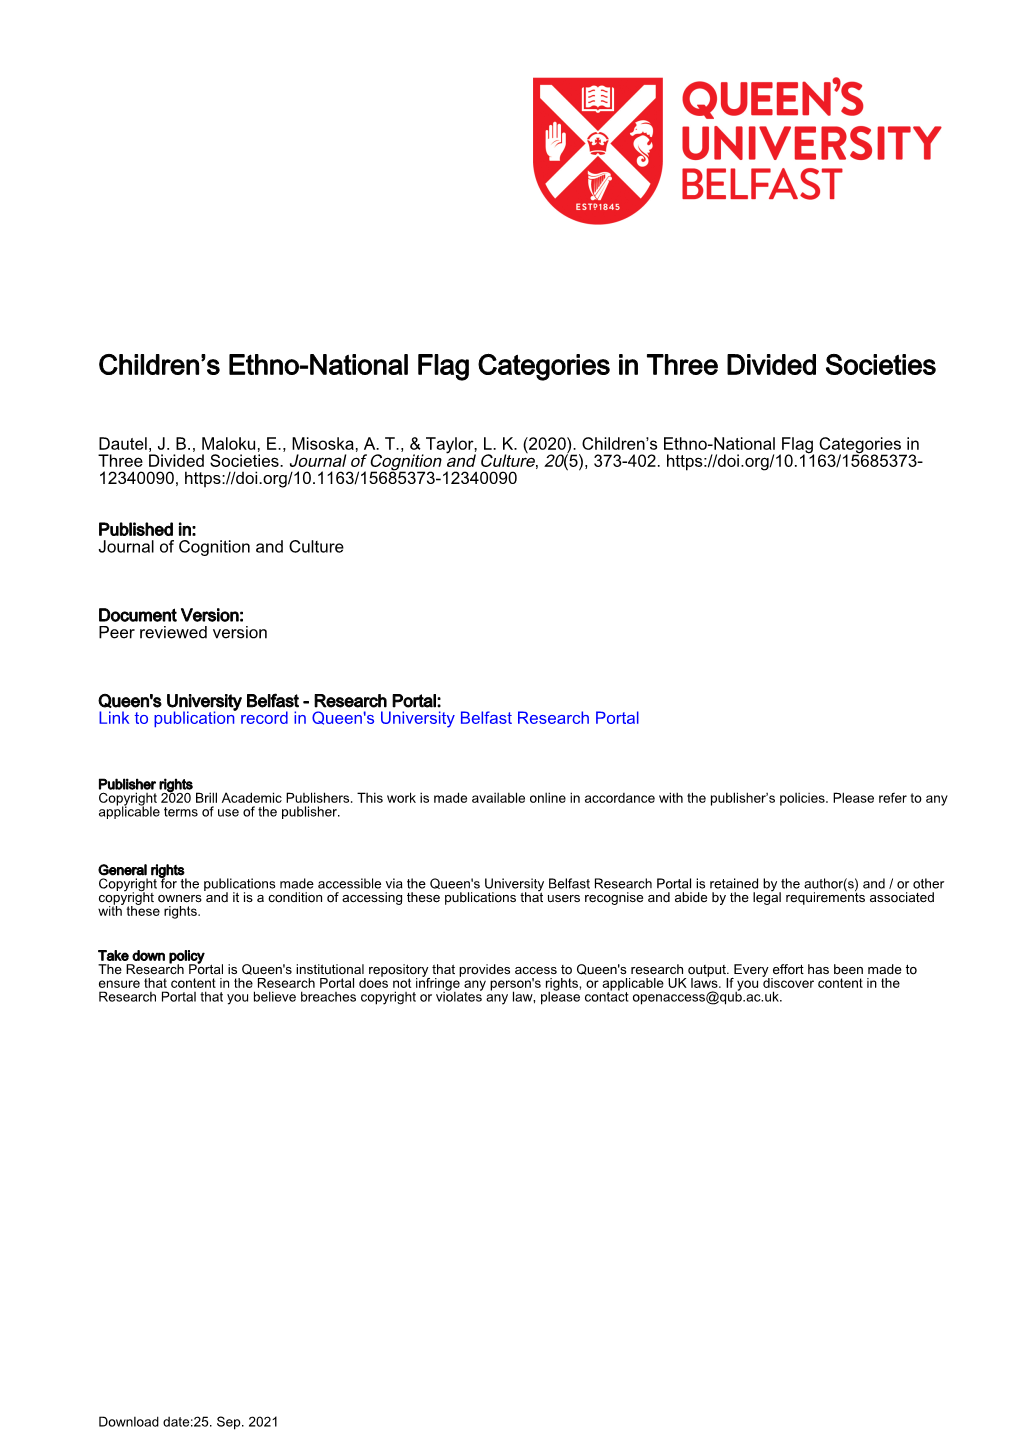 Children's Ethno-National Flag Categories in Three Divided Societies